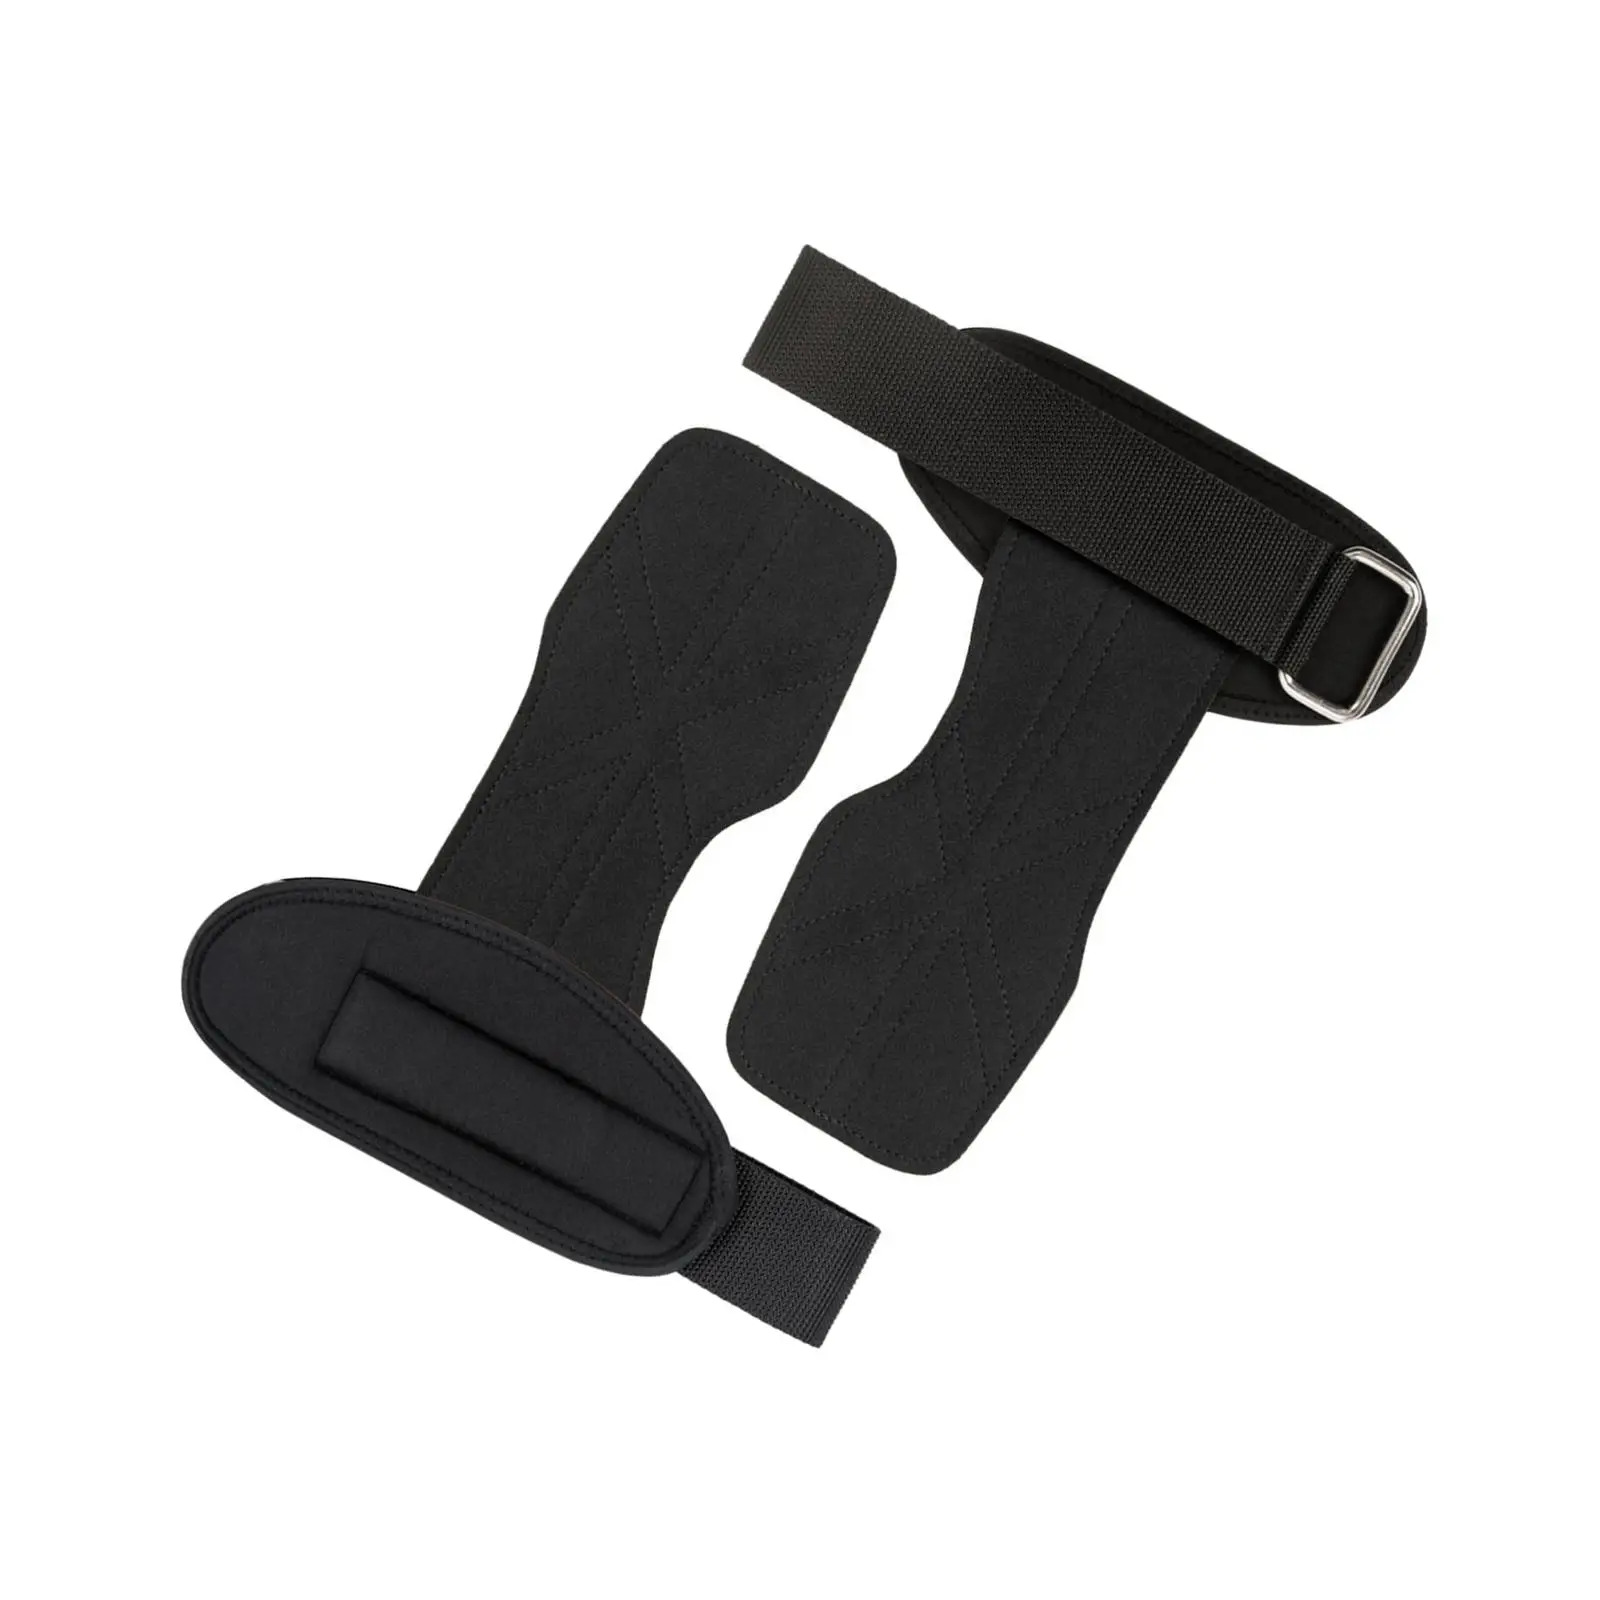 Lifting Wrist Support Wraps Heavy Duty Power Lifting Hooks for Bodybuilding Strength Training Exercise Deadlifting Unisex